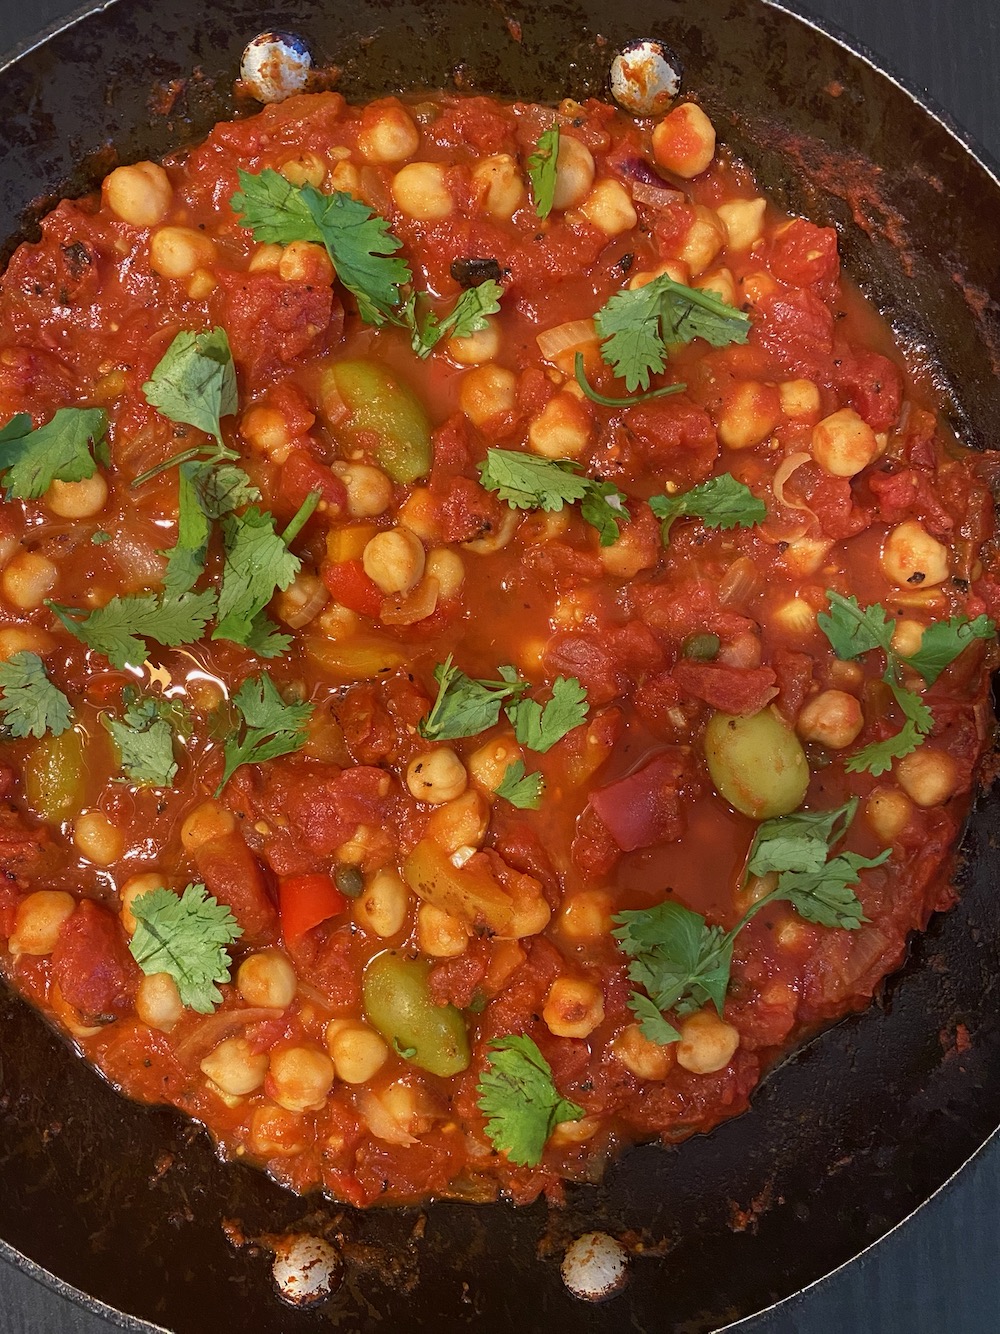 Chickpeas simmered in tomatoes.